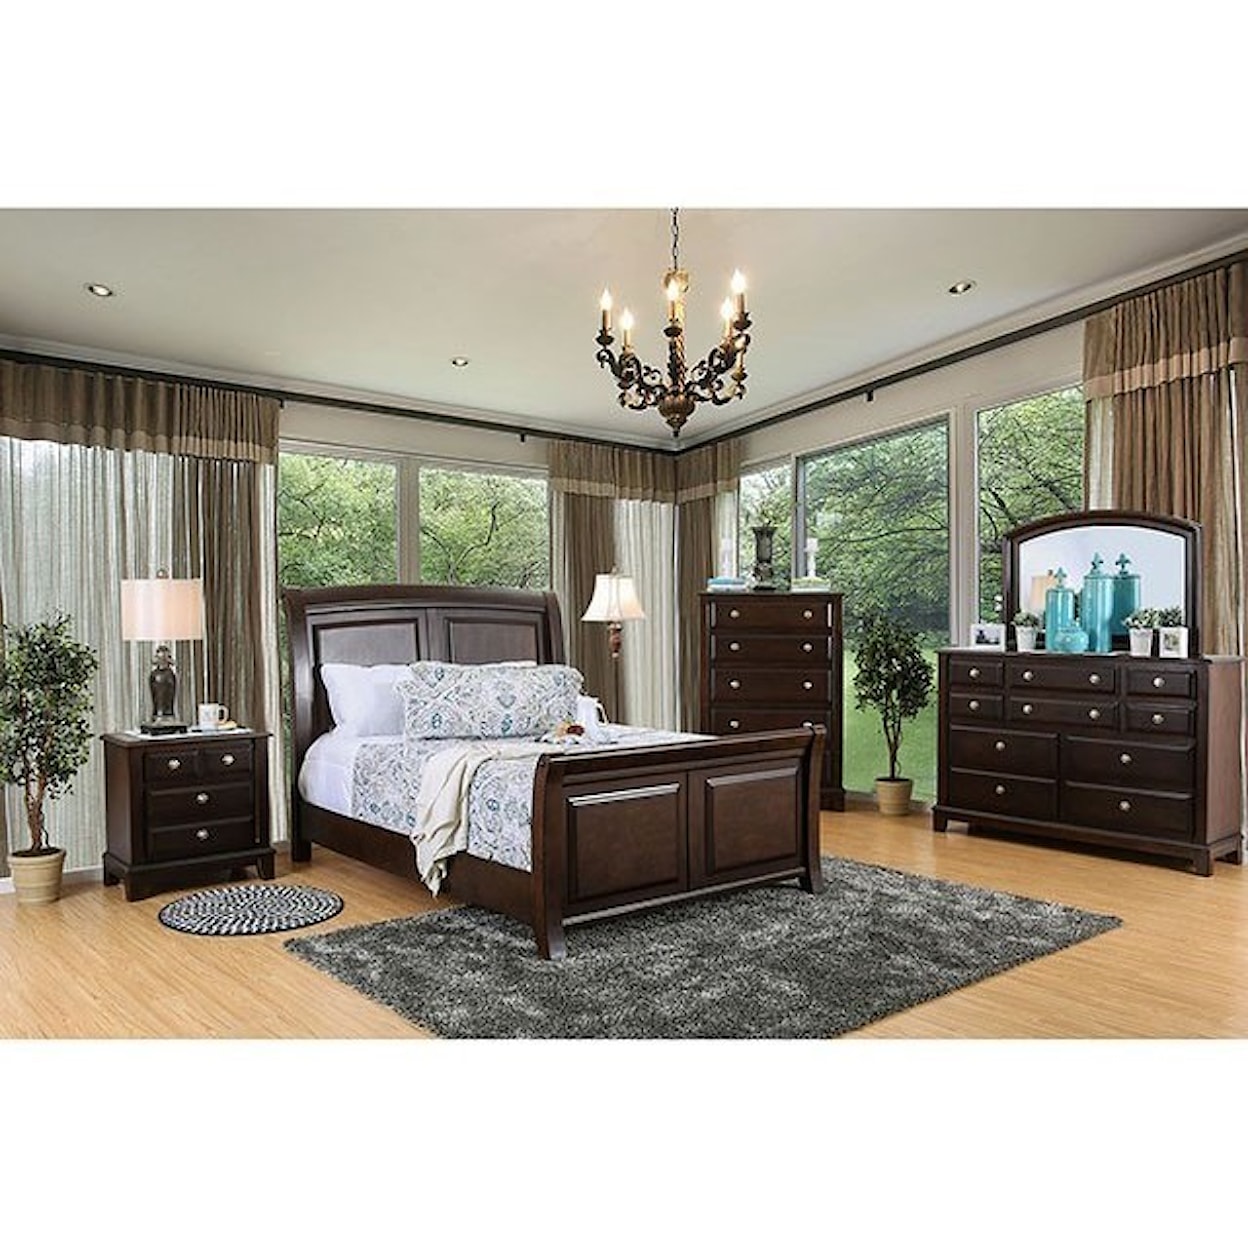 Furniture of America - FOA Litchville Cal King Sleigh Bed